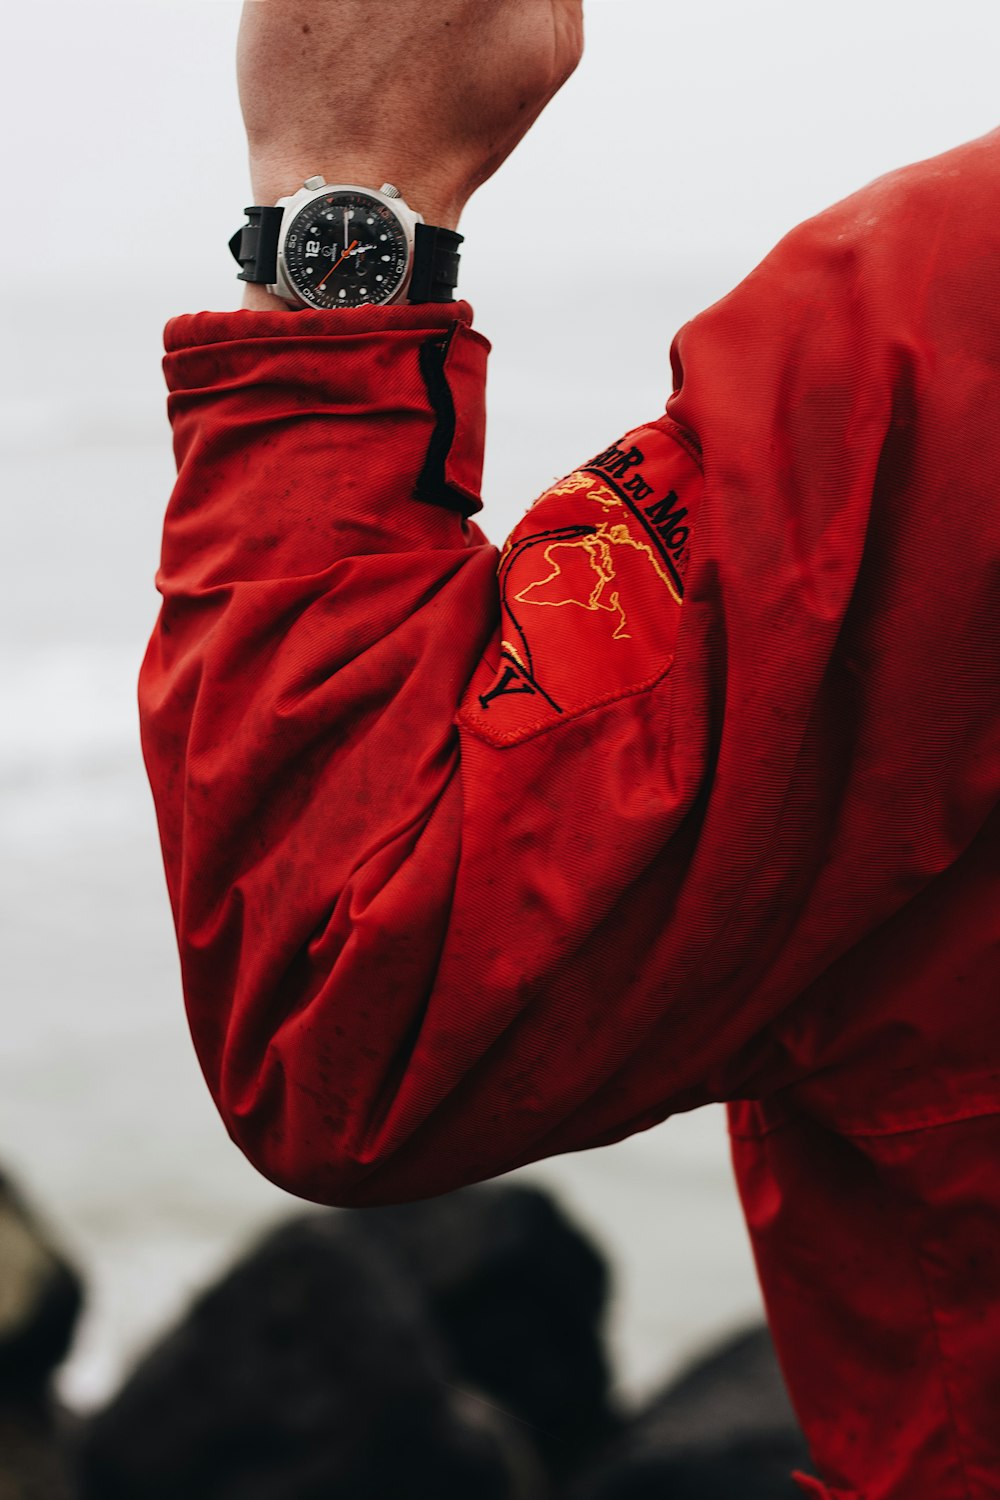 person in red jacket wearing black and silver watch